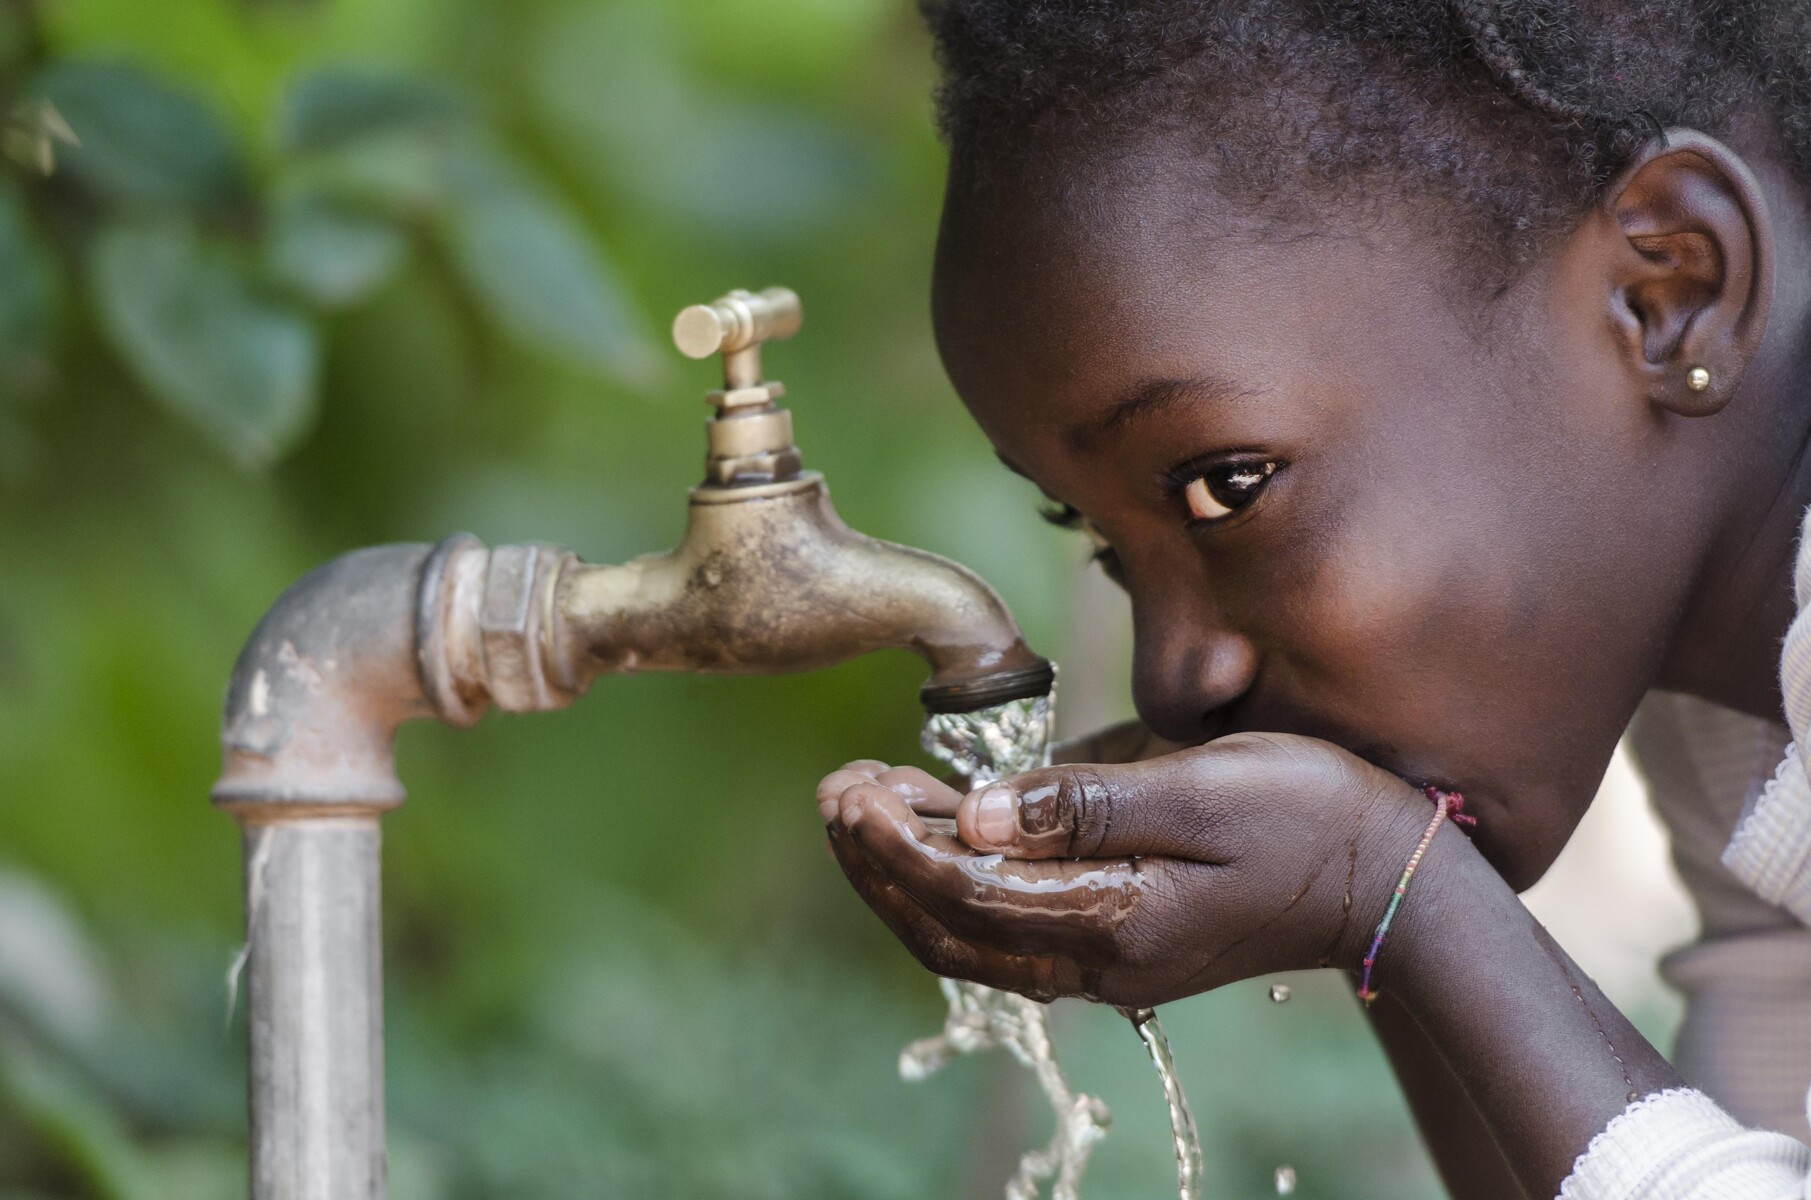 A girl drinking clear water from a tap